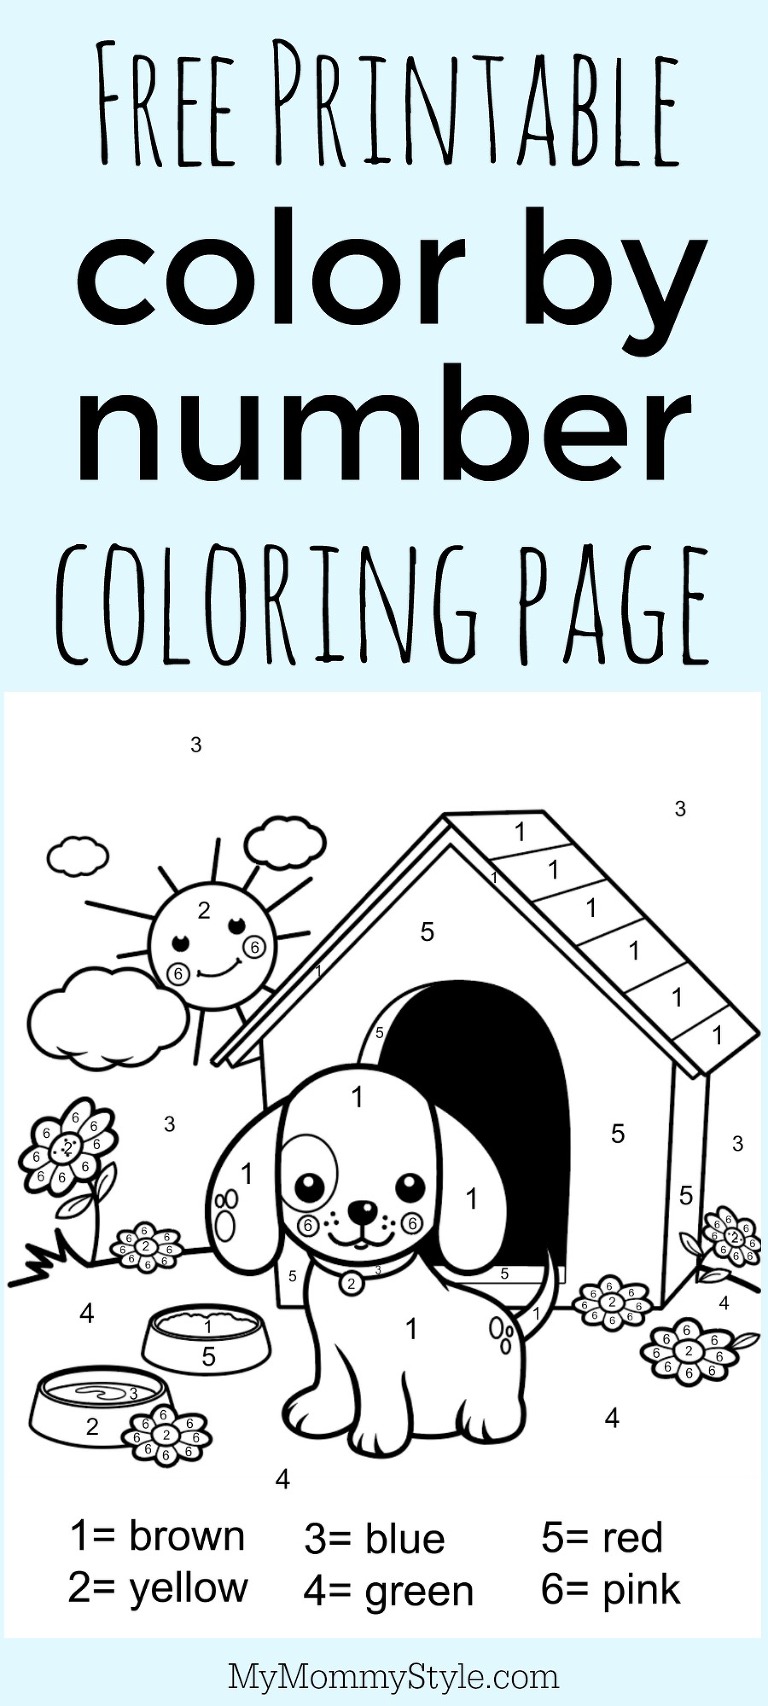 Easy Color by Number Printables · The Typical Mom